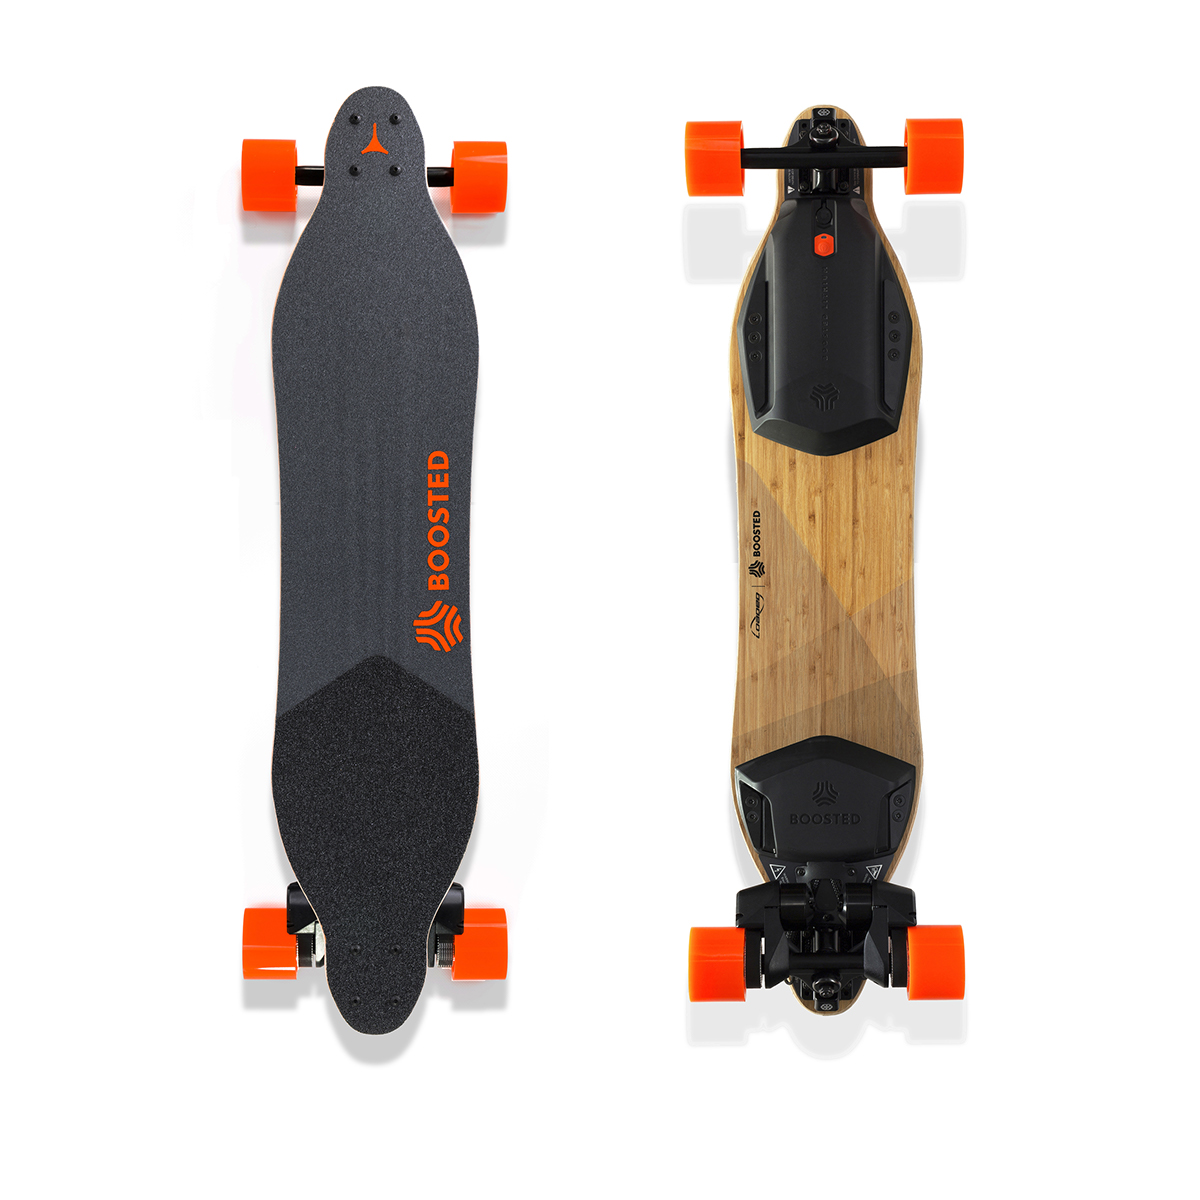 boosted   Boosted Boards skateboard electric Vehicle Sustainable Design aternative energy lev LMV Boosted Inc. LONGBOARD lifestyle surfing